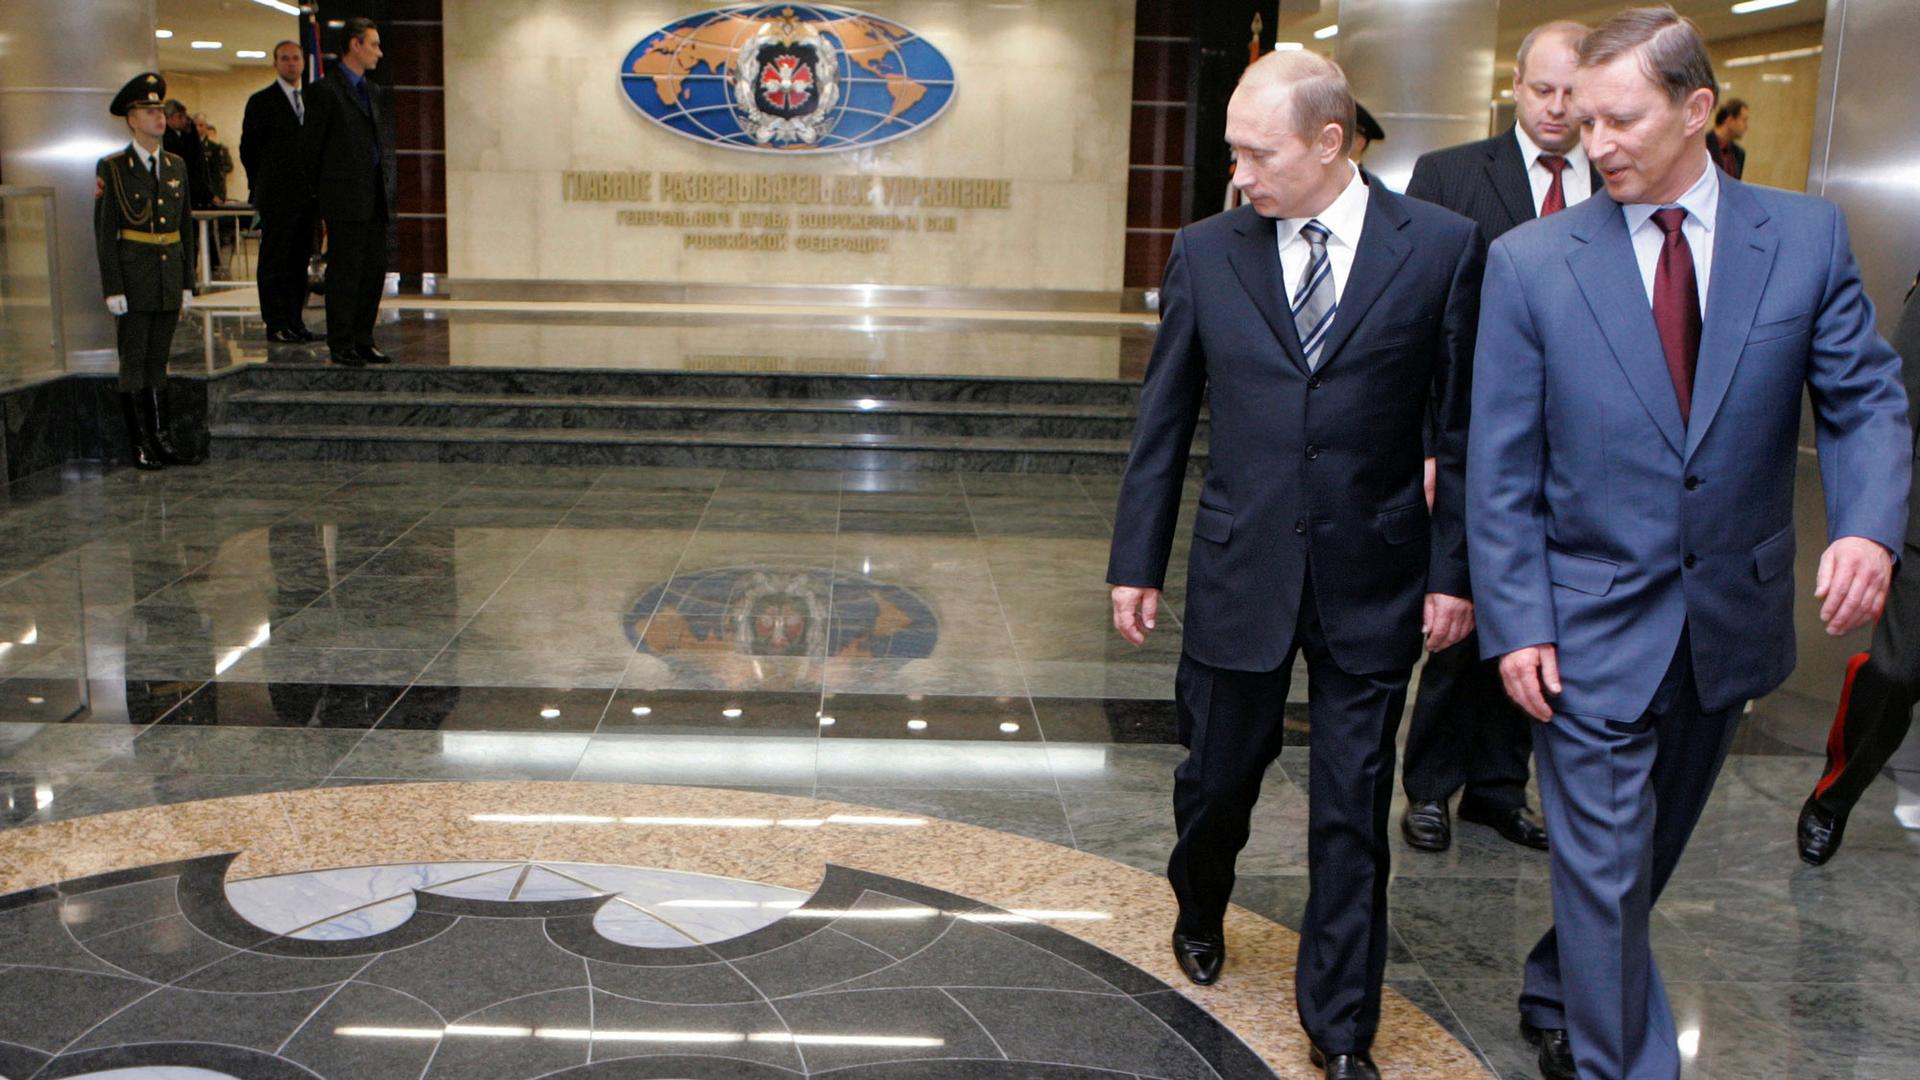 Russian President Vladimir Putin and Defense Minister Sergei Ivanov are shown walking past a marble floor depicting a bat at the new GRU military intelligence headquarters building in Russia. 